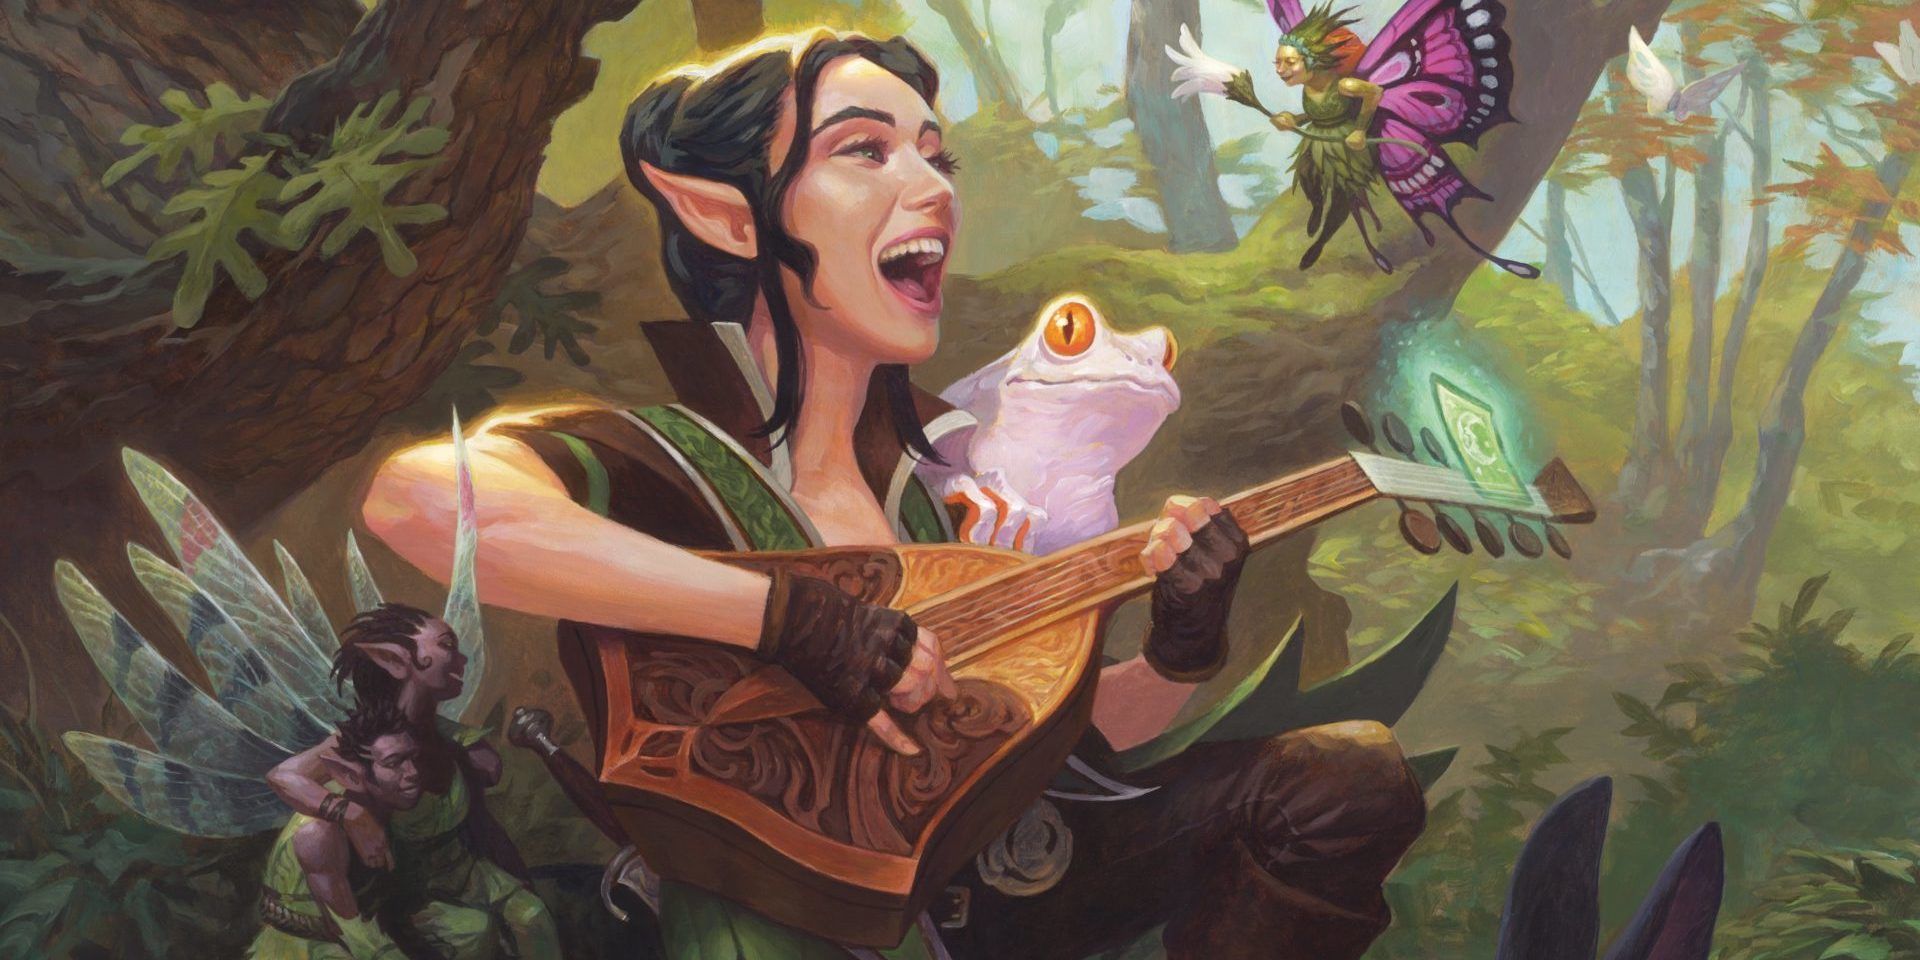 An elven woman with dark hair strumming a lyre as she sits with her albino frog familiar.